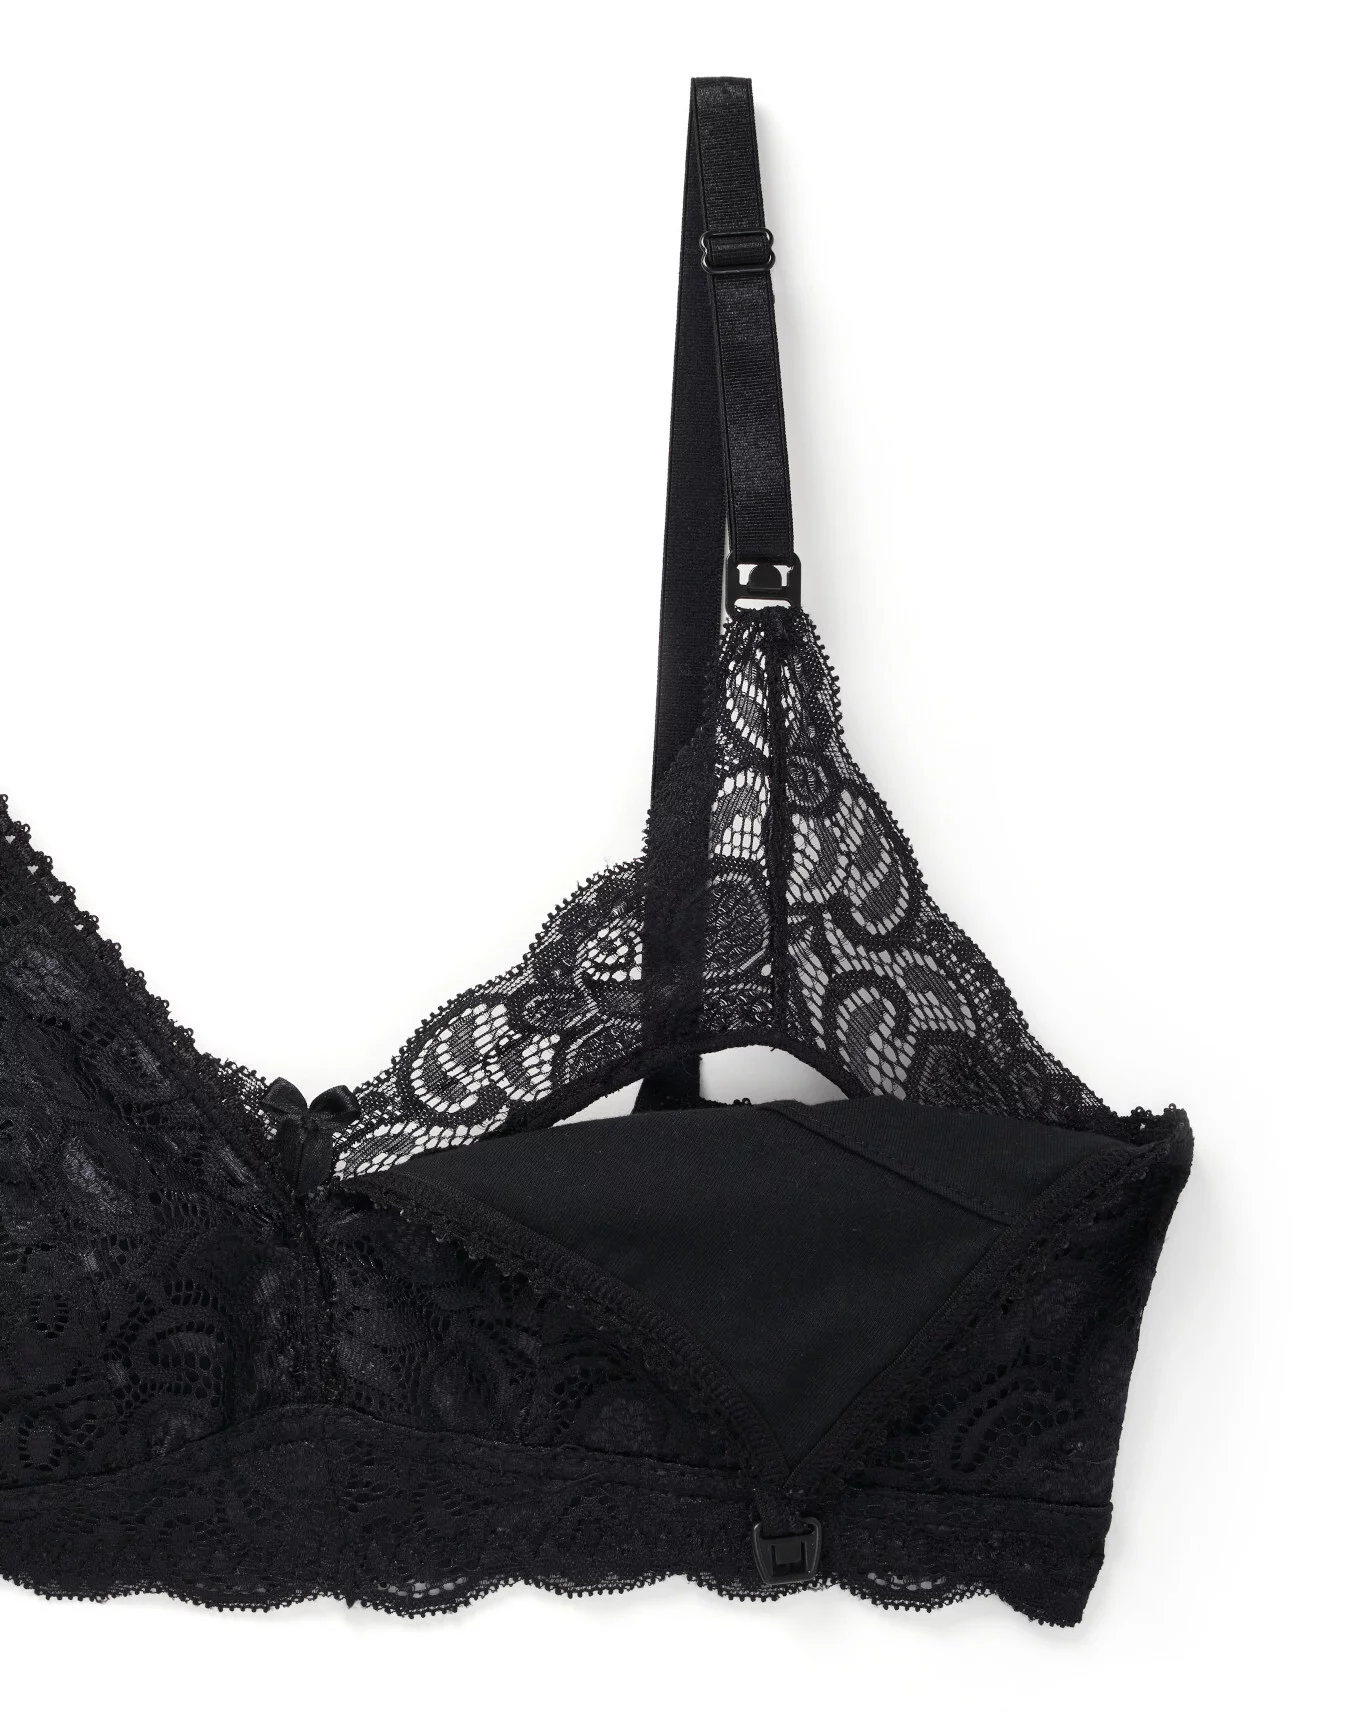 Adore Me, Intimates & Sleepwear, Black Lace Bra Adored By Adore Me 4dd